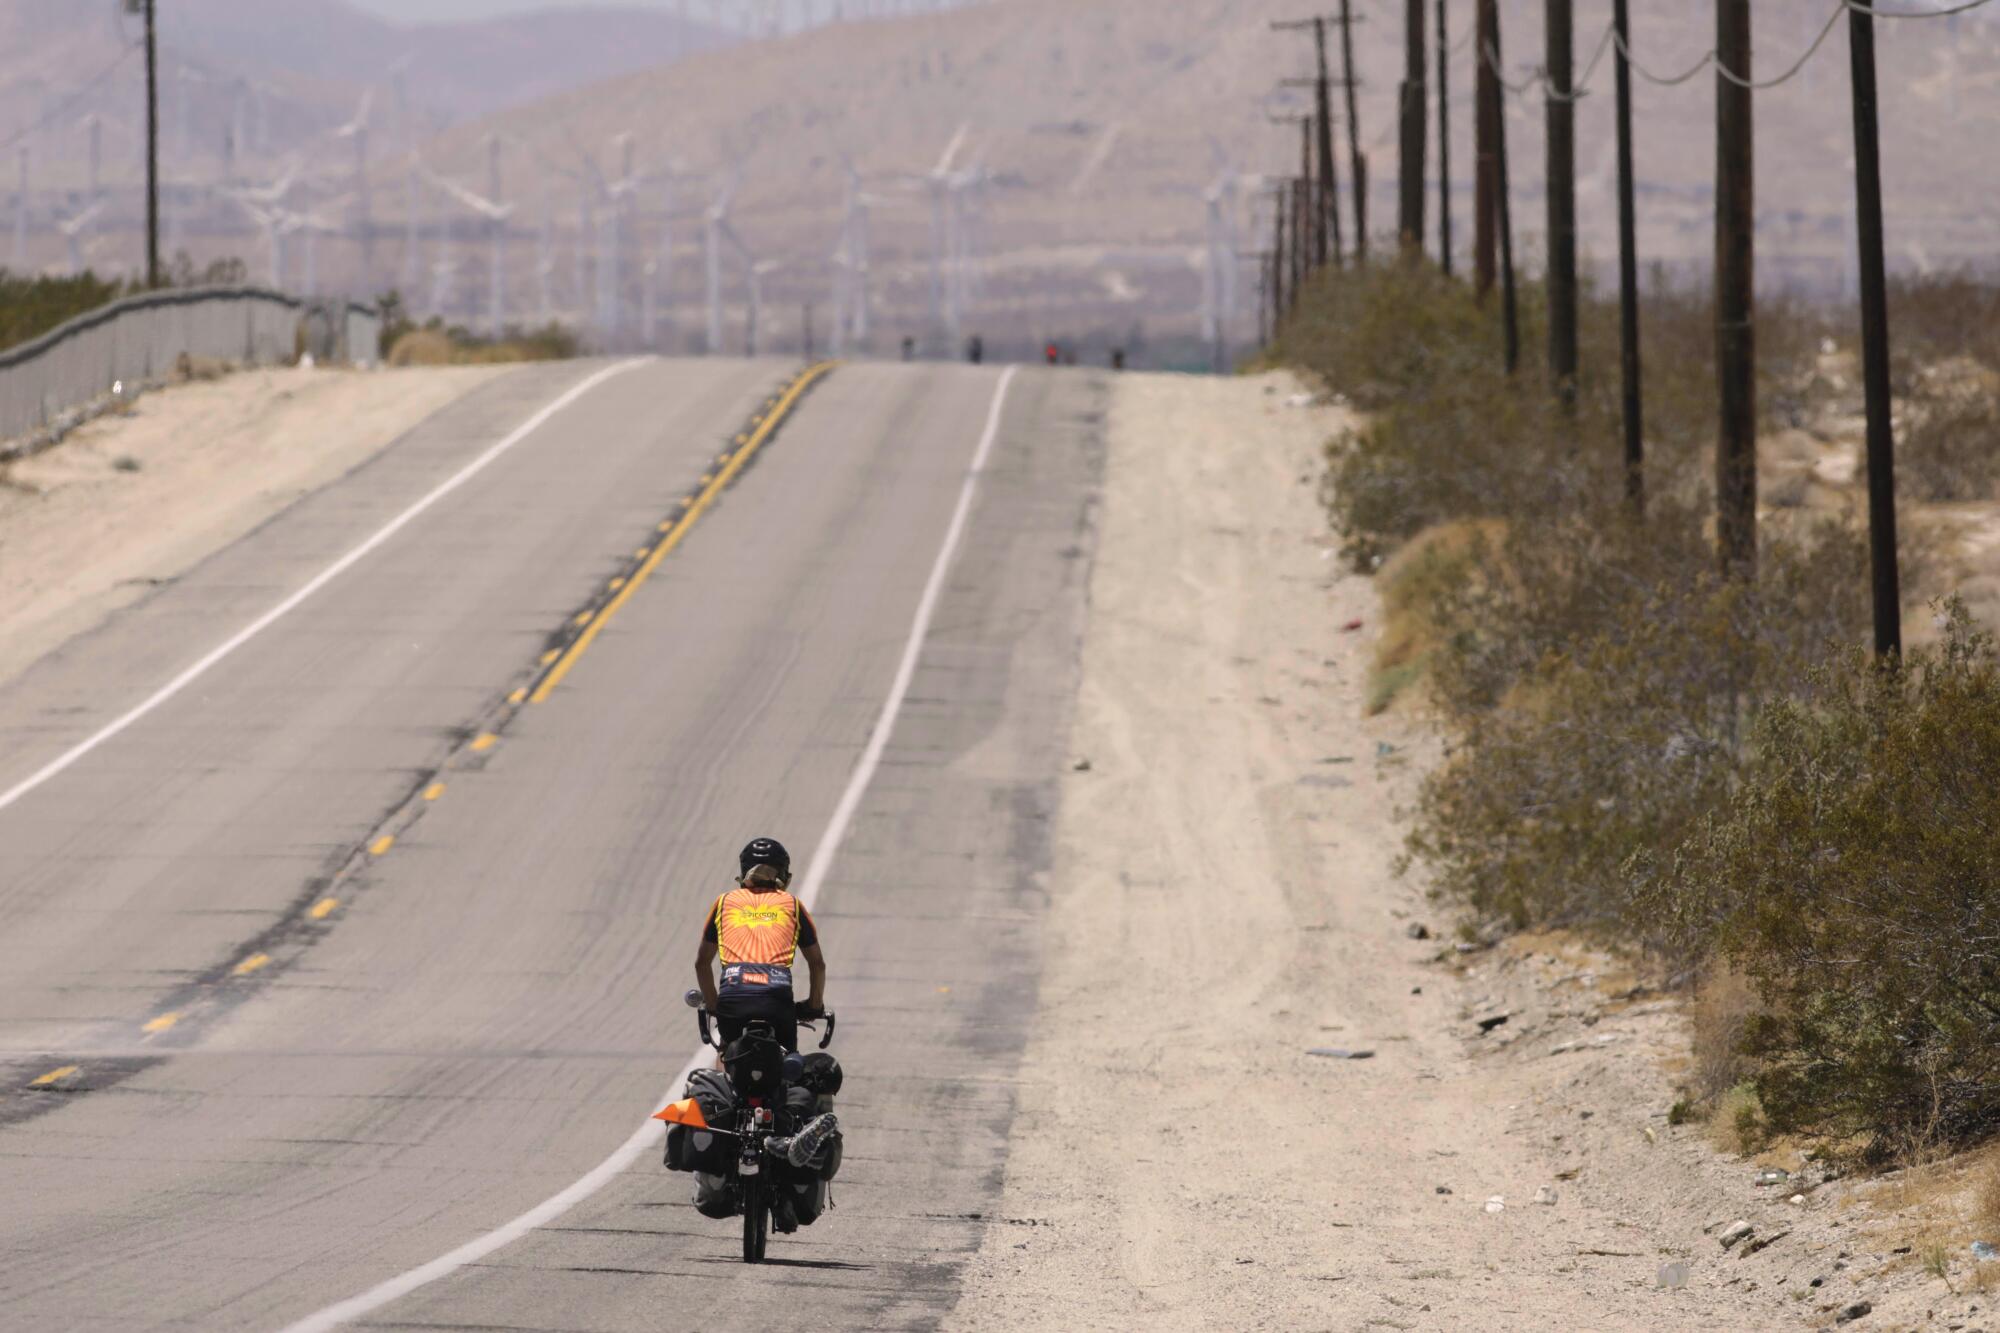 A man that goes by the nickmane Popcorn, 68, rides his bike down Dillon Road in Desert Hot Springs .